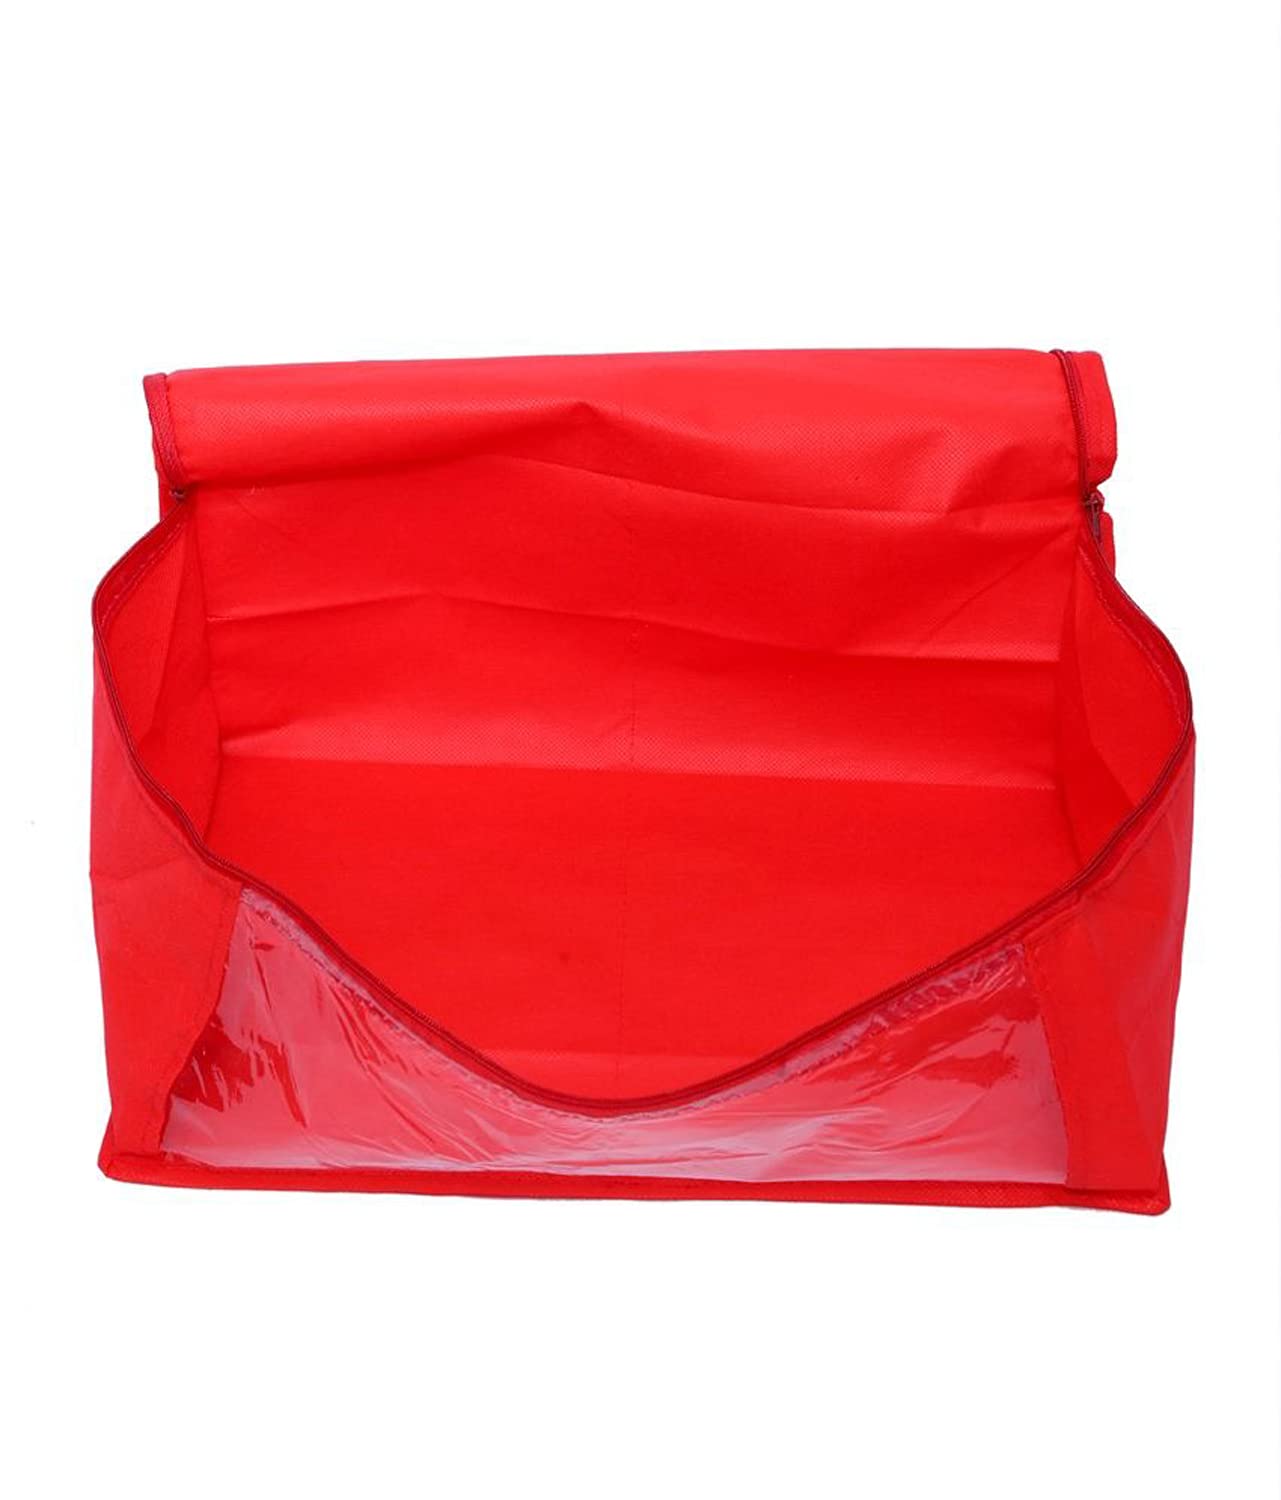 Kuber Industries Non Woven Saree Covers With Zip|Saree Covers For Storage|Saree Packing Covers For Wedding|Pack Of 12 Piece (Red)